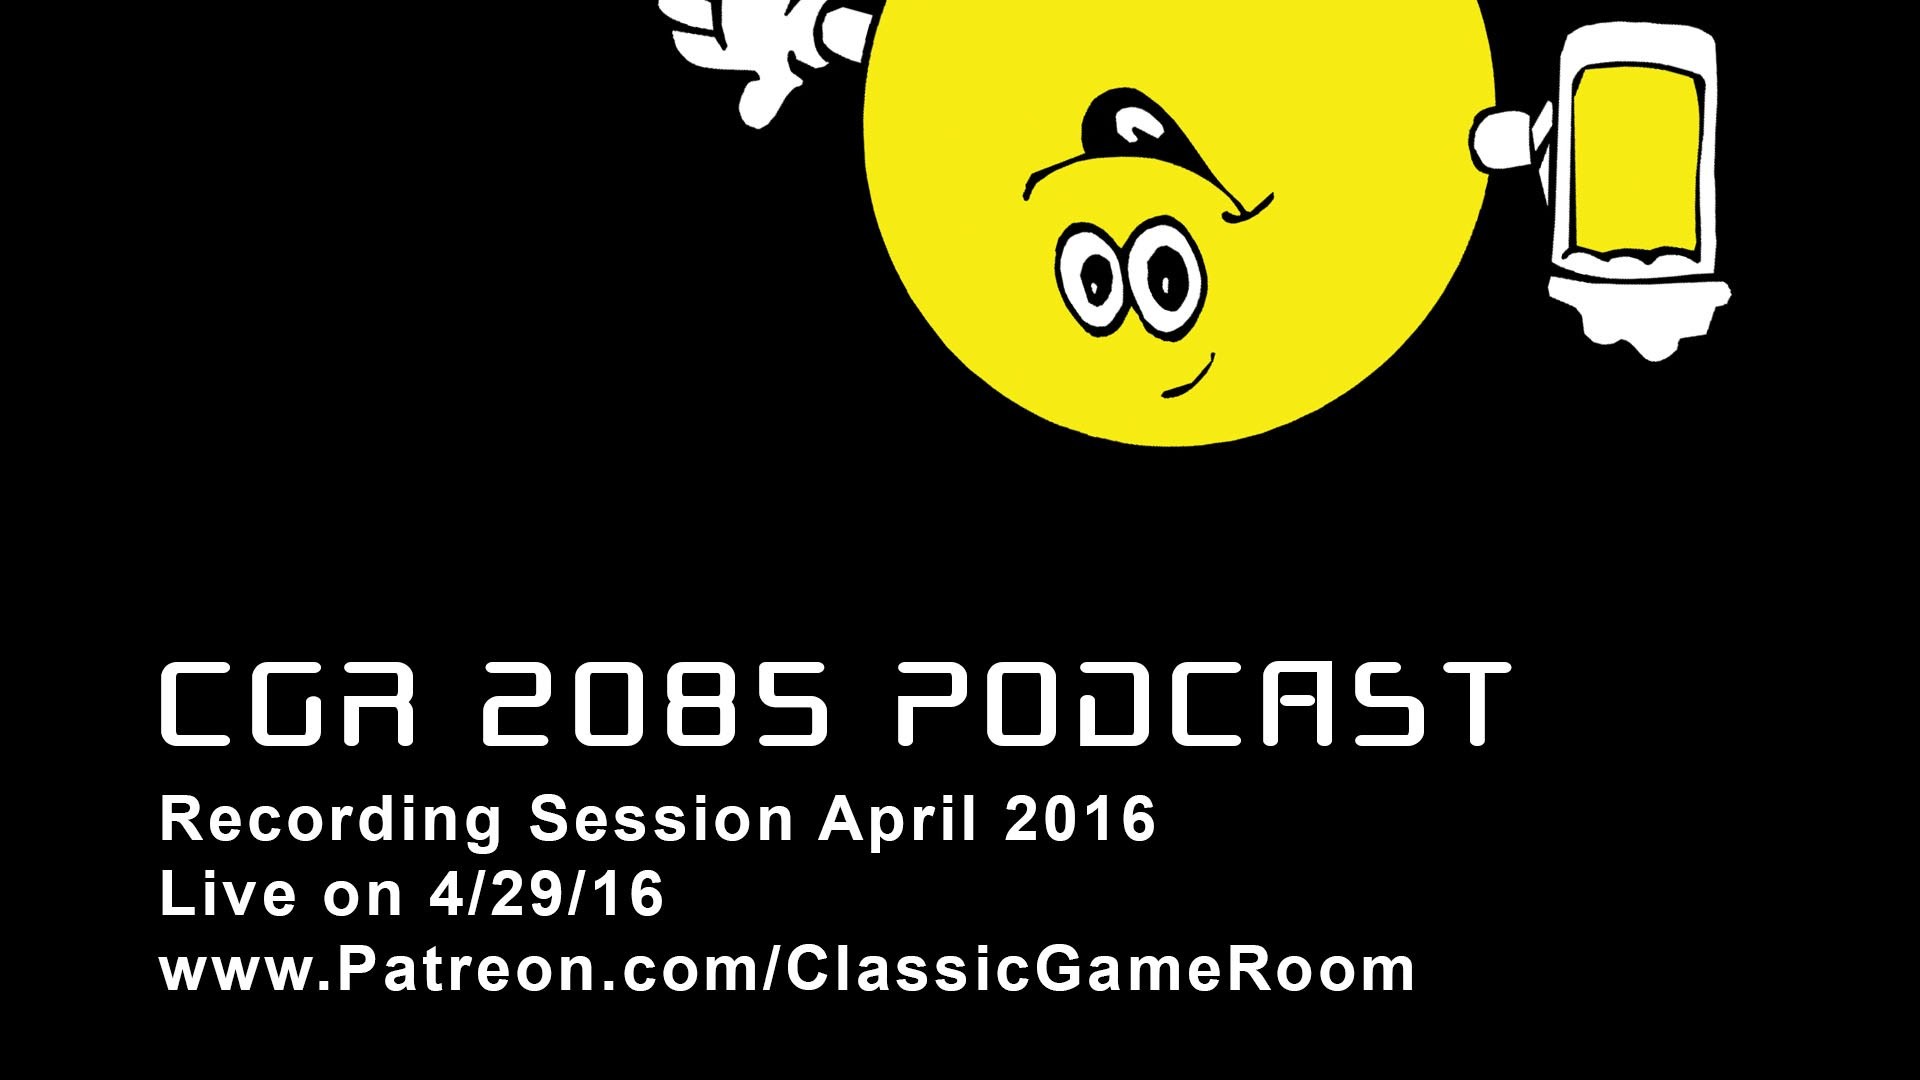 Classic Game Room – CGR 2085 PODCAST 80s Cartoons Recording Session